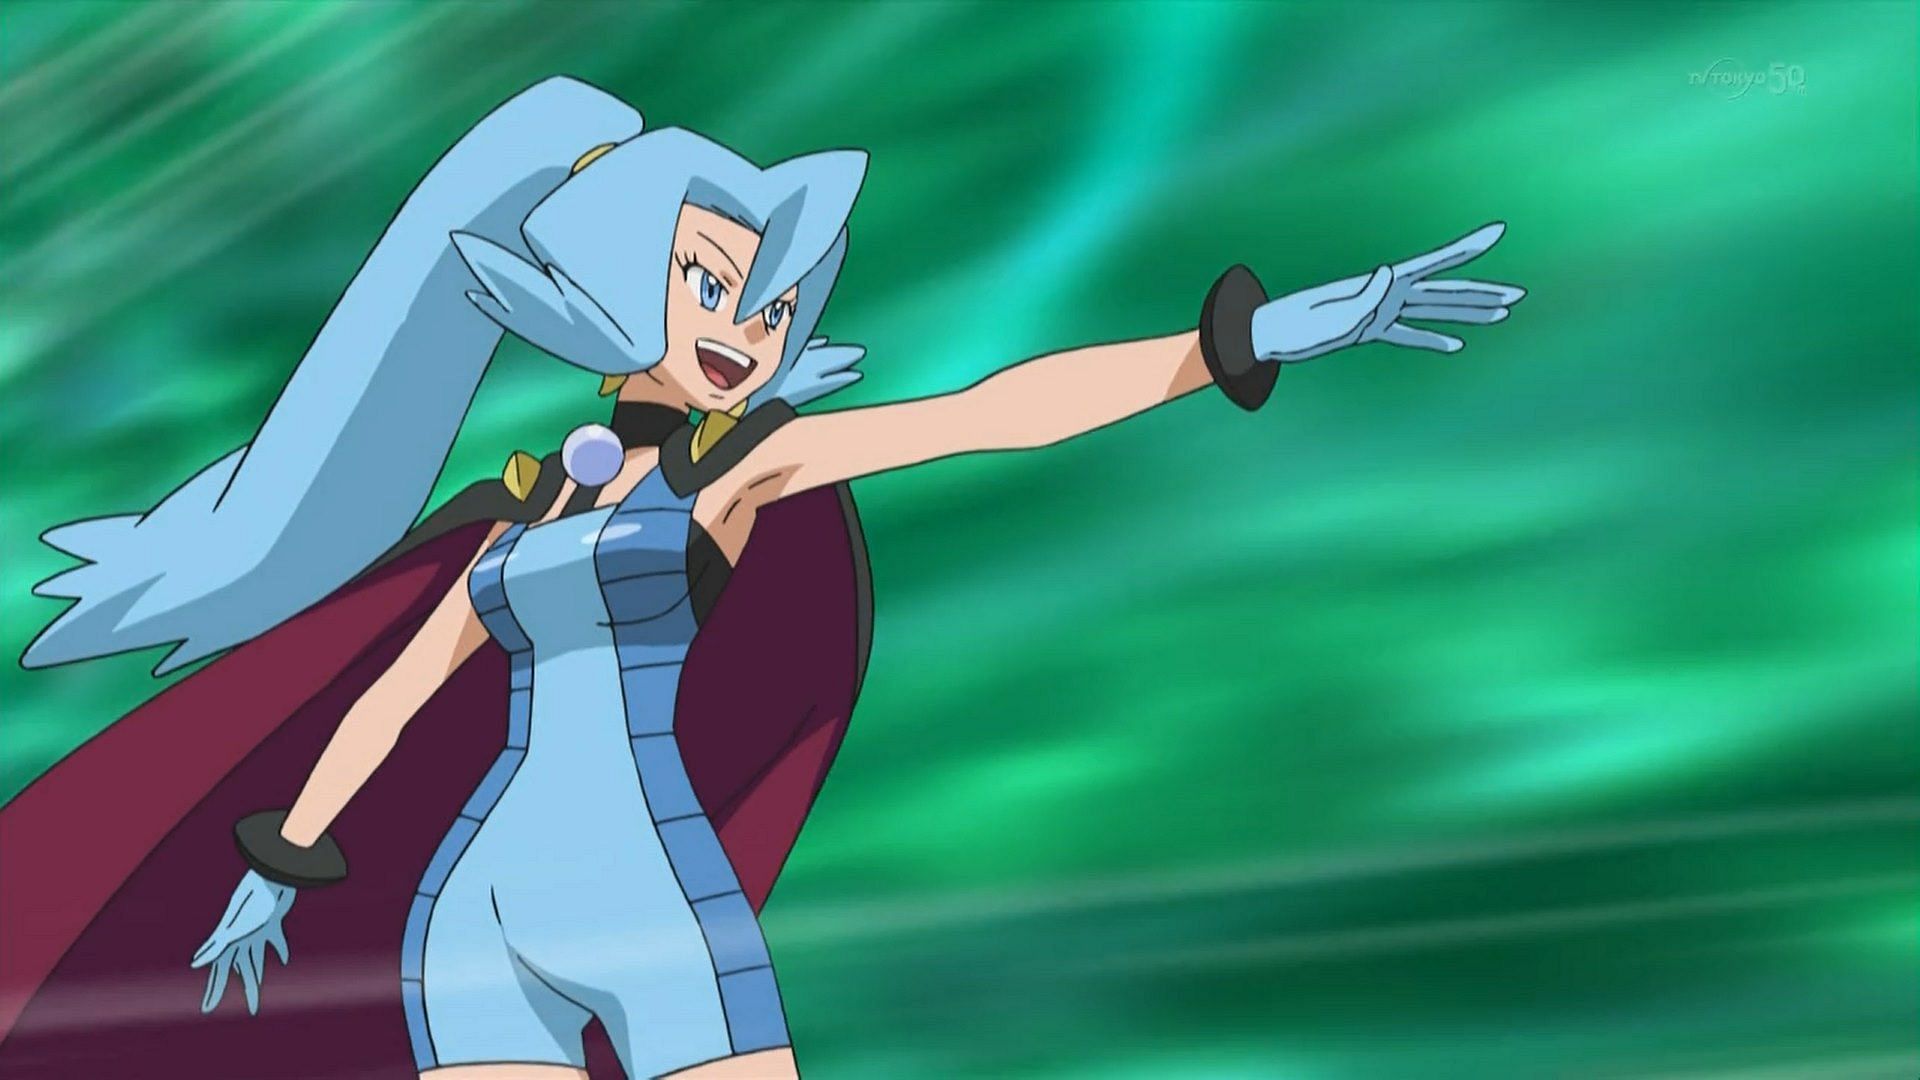 Clair has beauty and Power (Image credits: OLM Incorporated, Pokemon: Black and White)